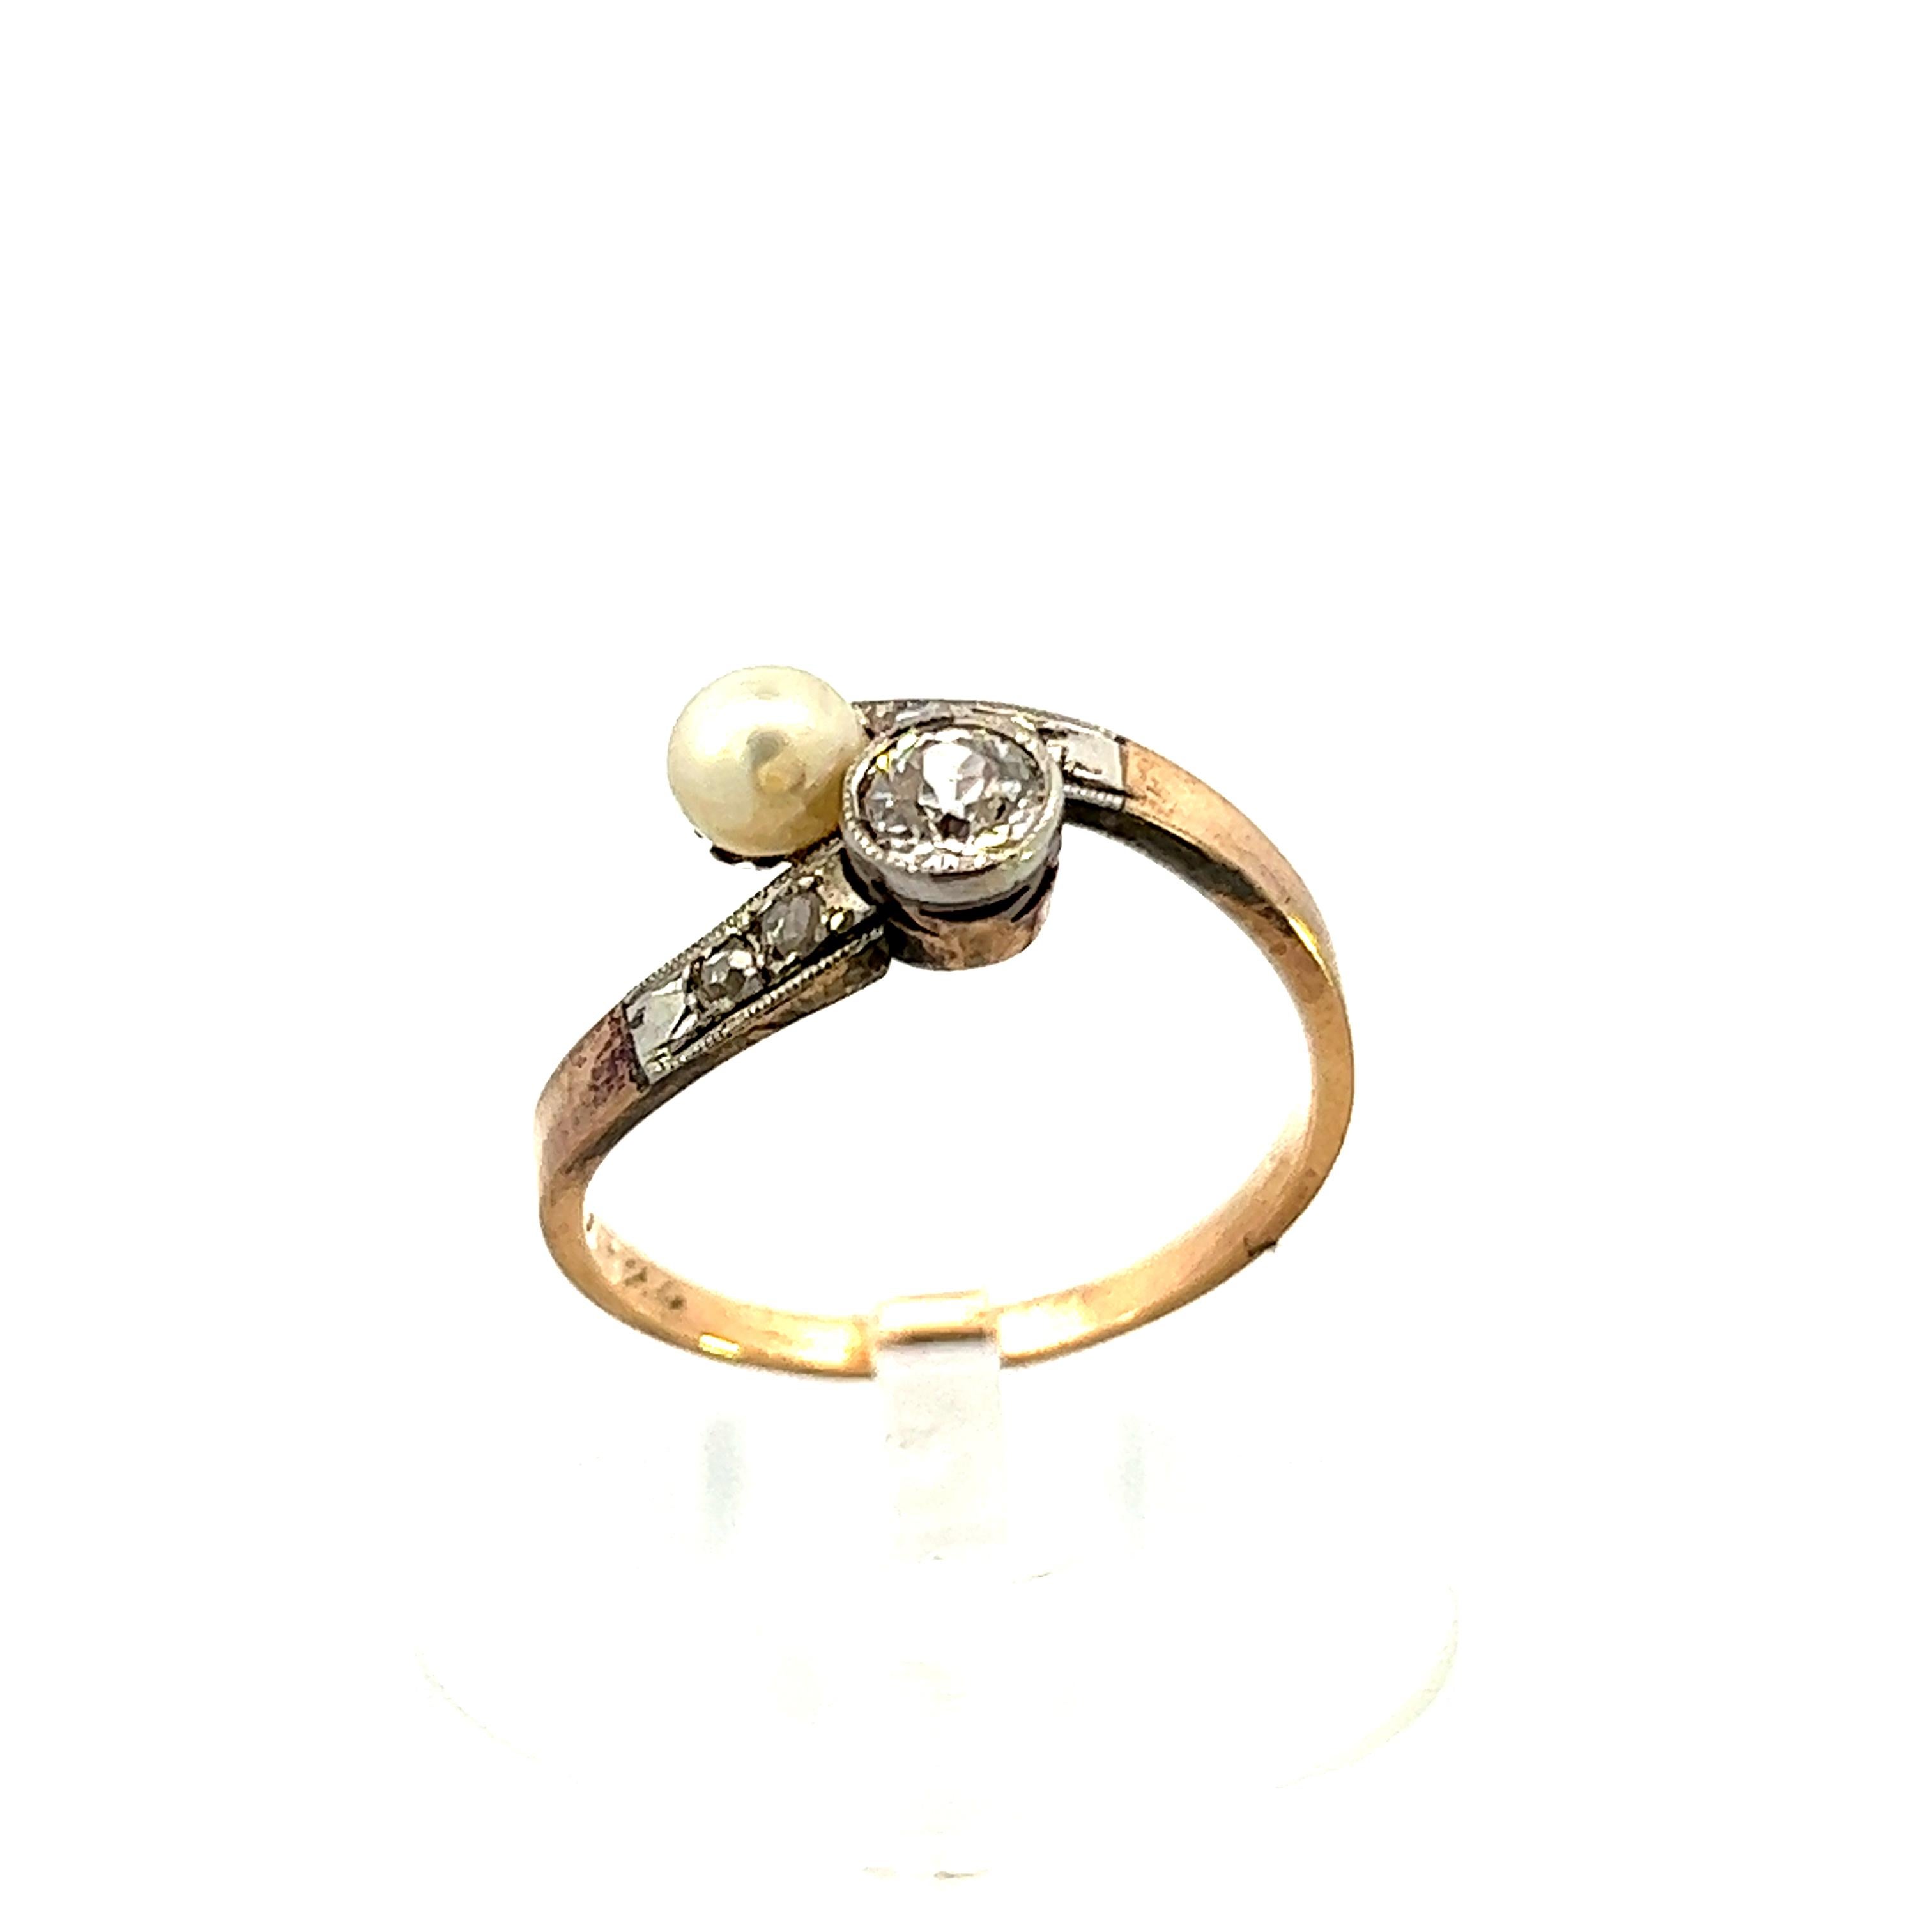 1925 Art Deco Platinum Diamond & Pearl Bypass Ring - Platinum Over Gold  For Sale 2